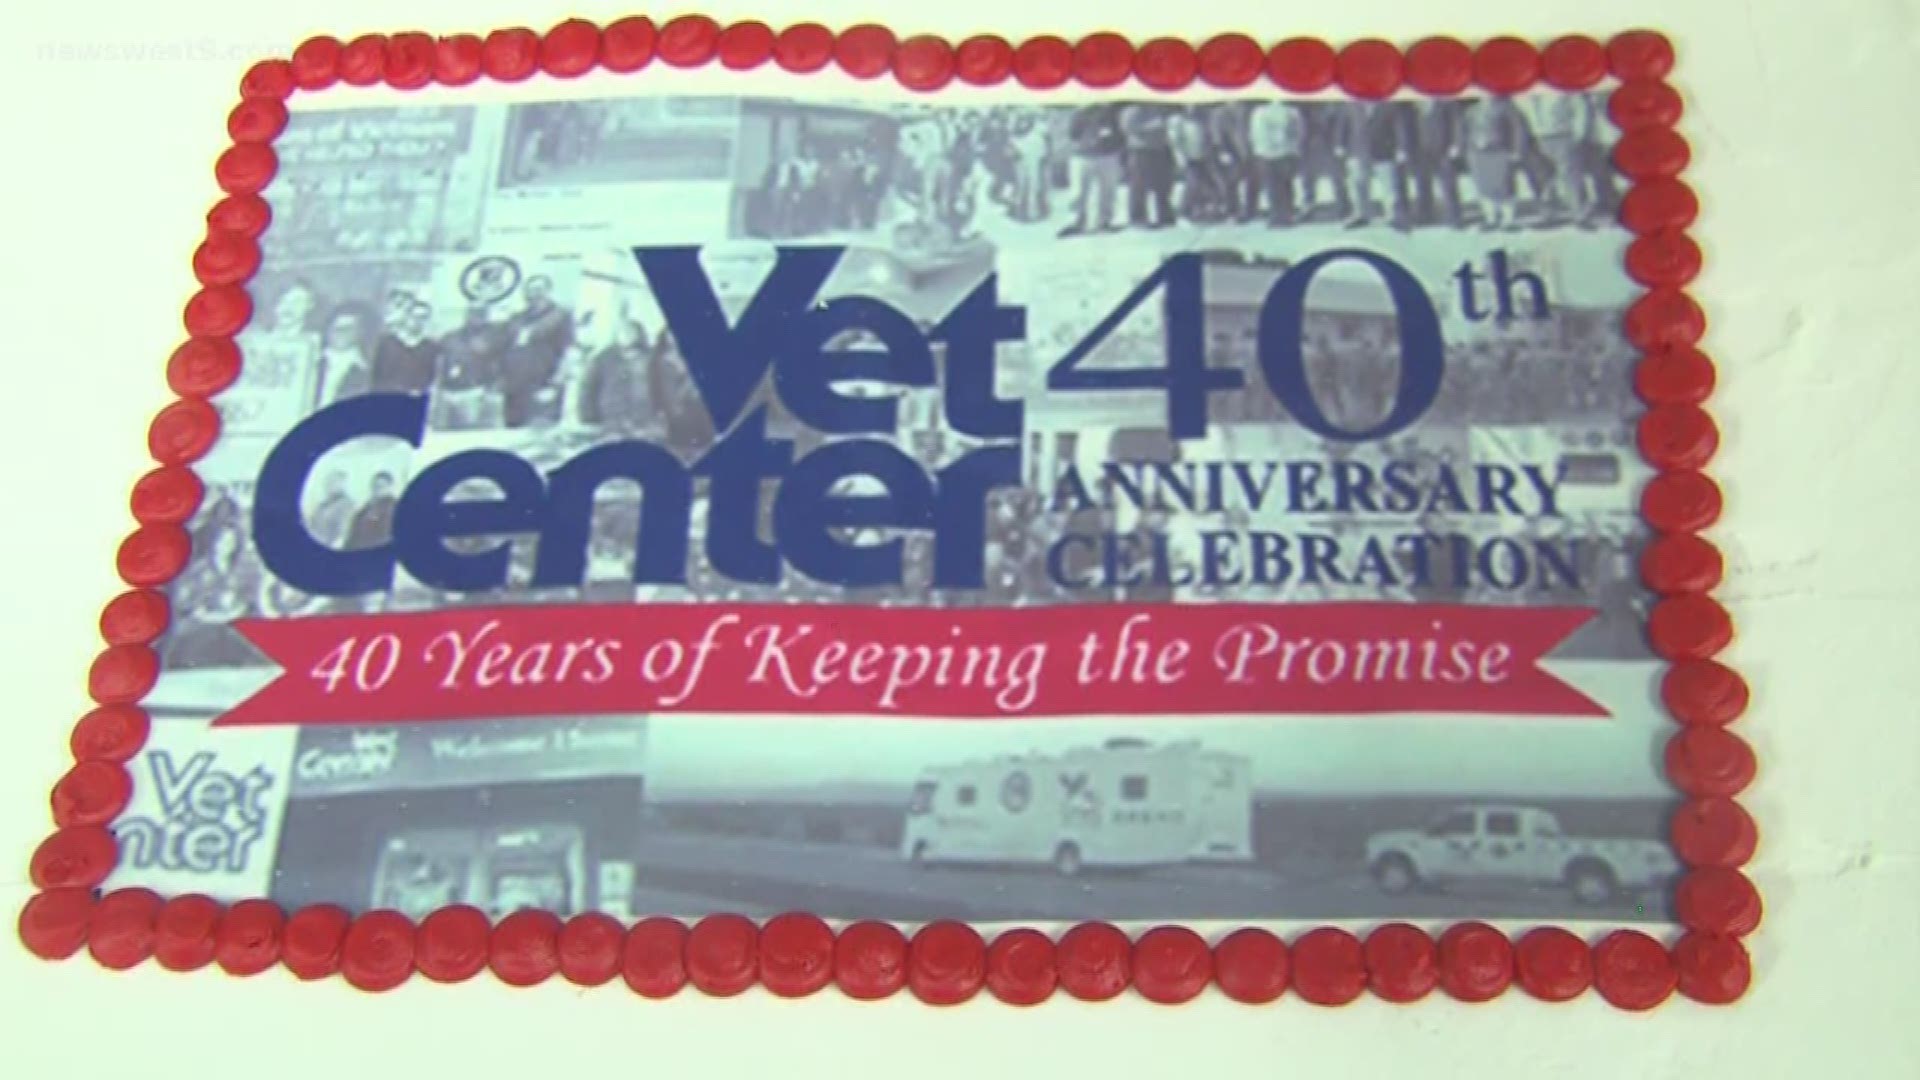 Veterans and family members are invited to enjoy cake and snacks in celebration of the center's anniversary.